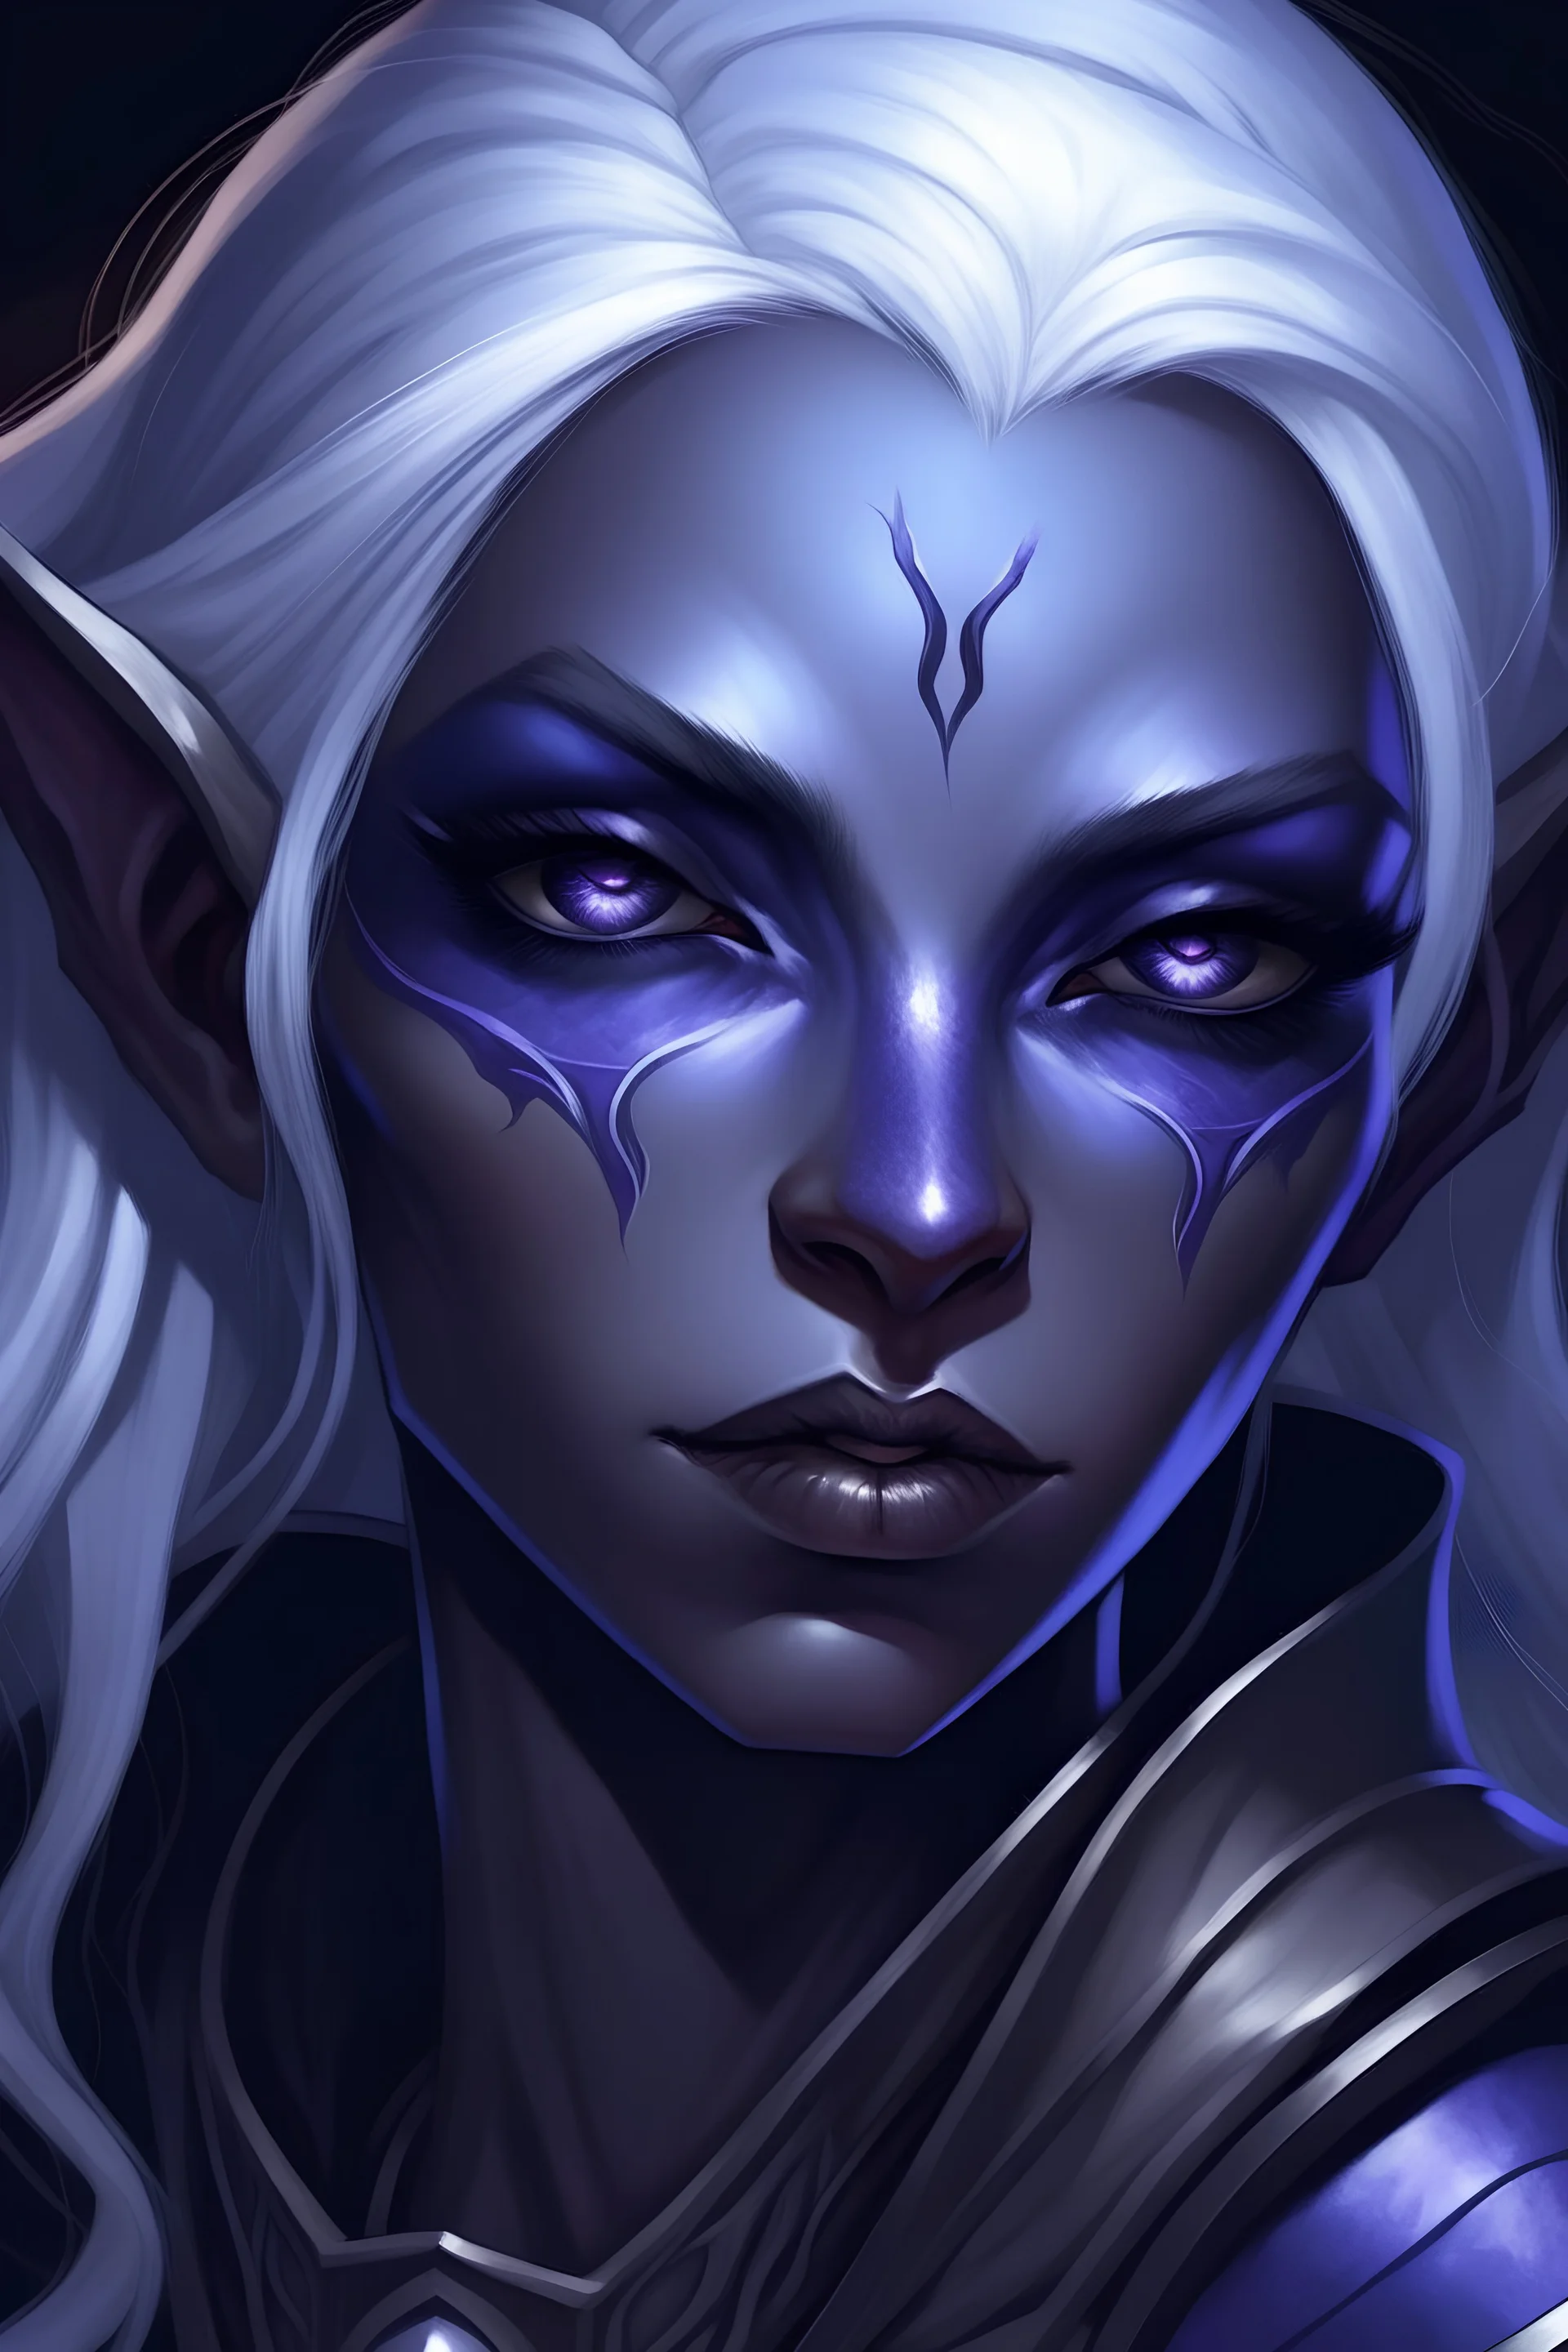 Dungeons and Dragons portrait of the face of a female drow inquisitor blessed by Eilistraee. She has white hair, purple eyes, and is surrounded by moonlight